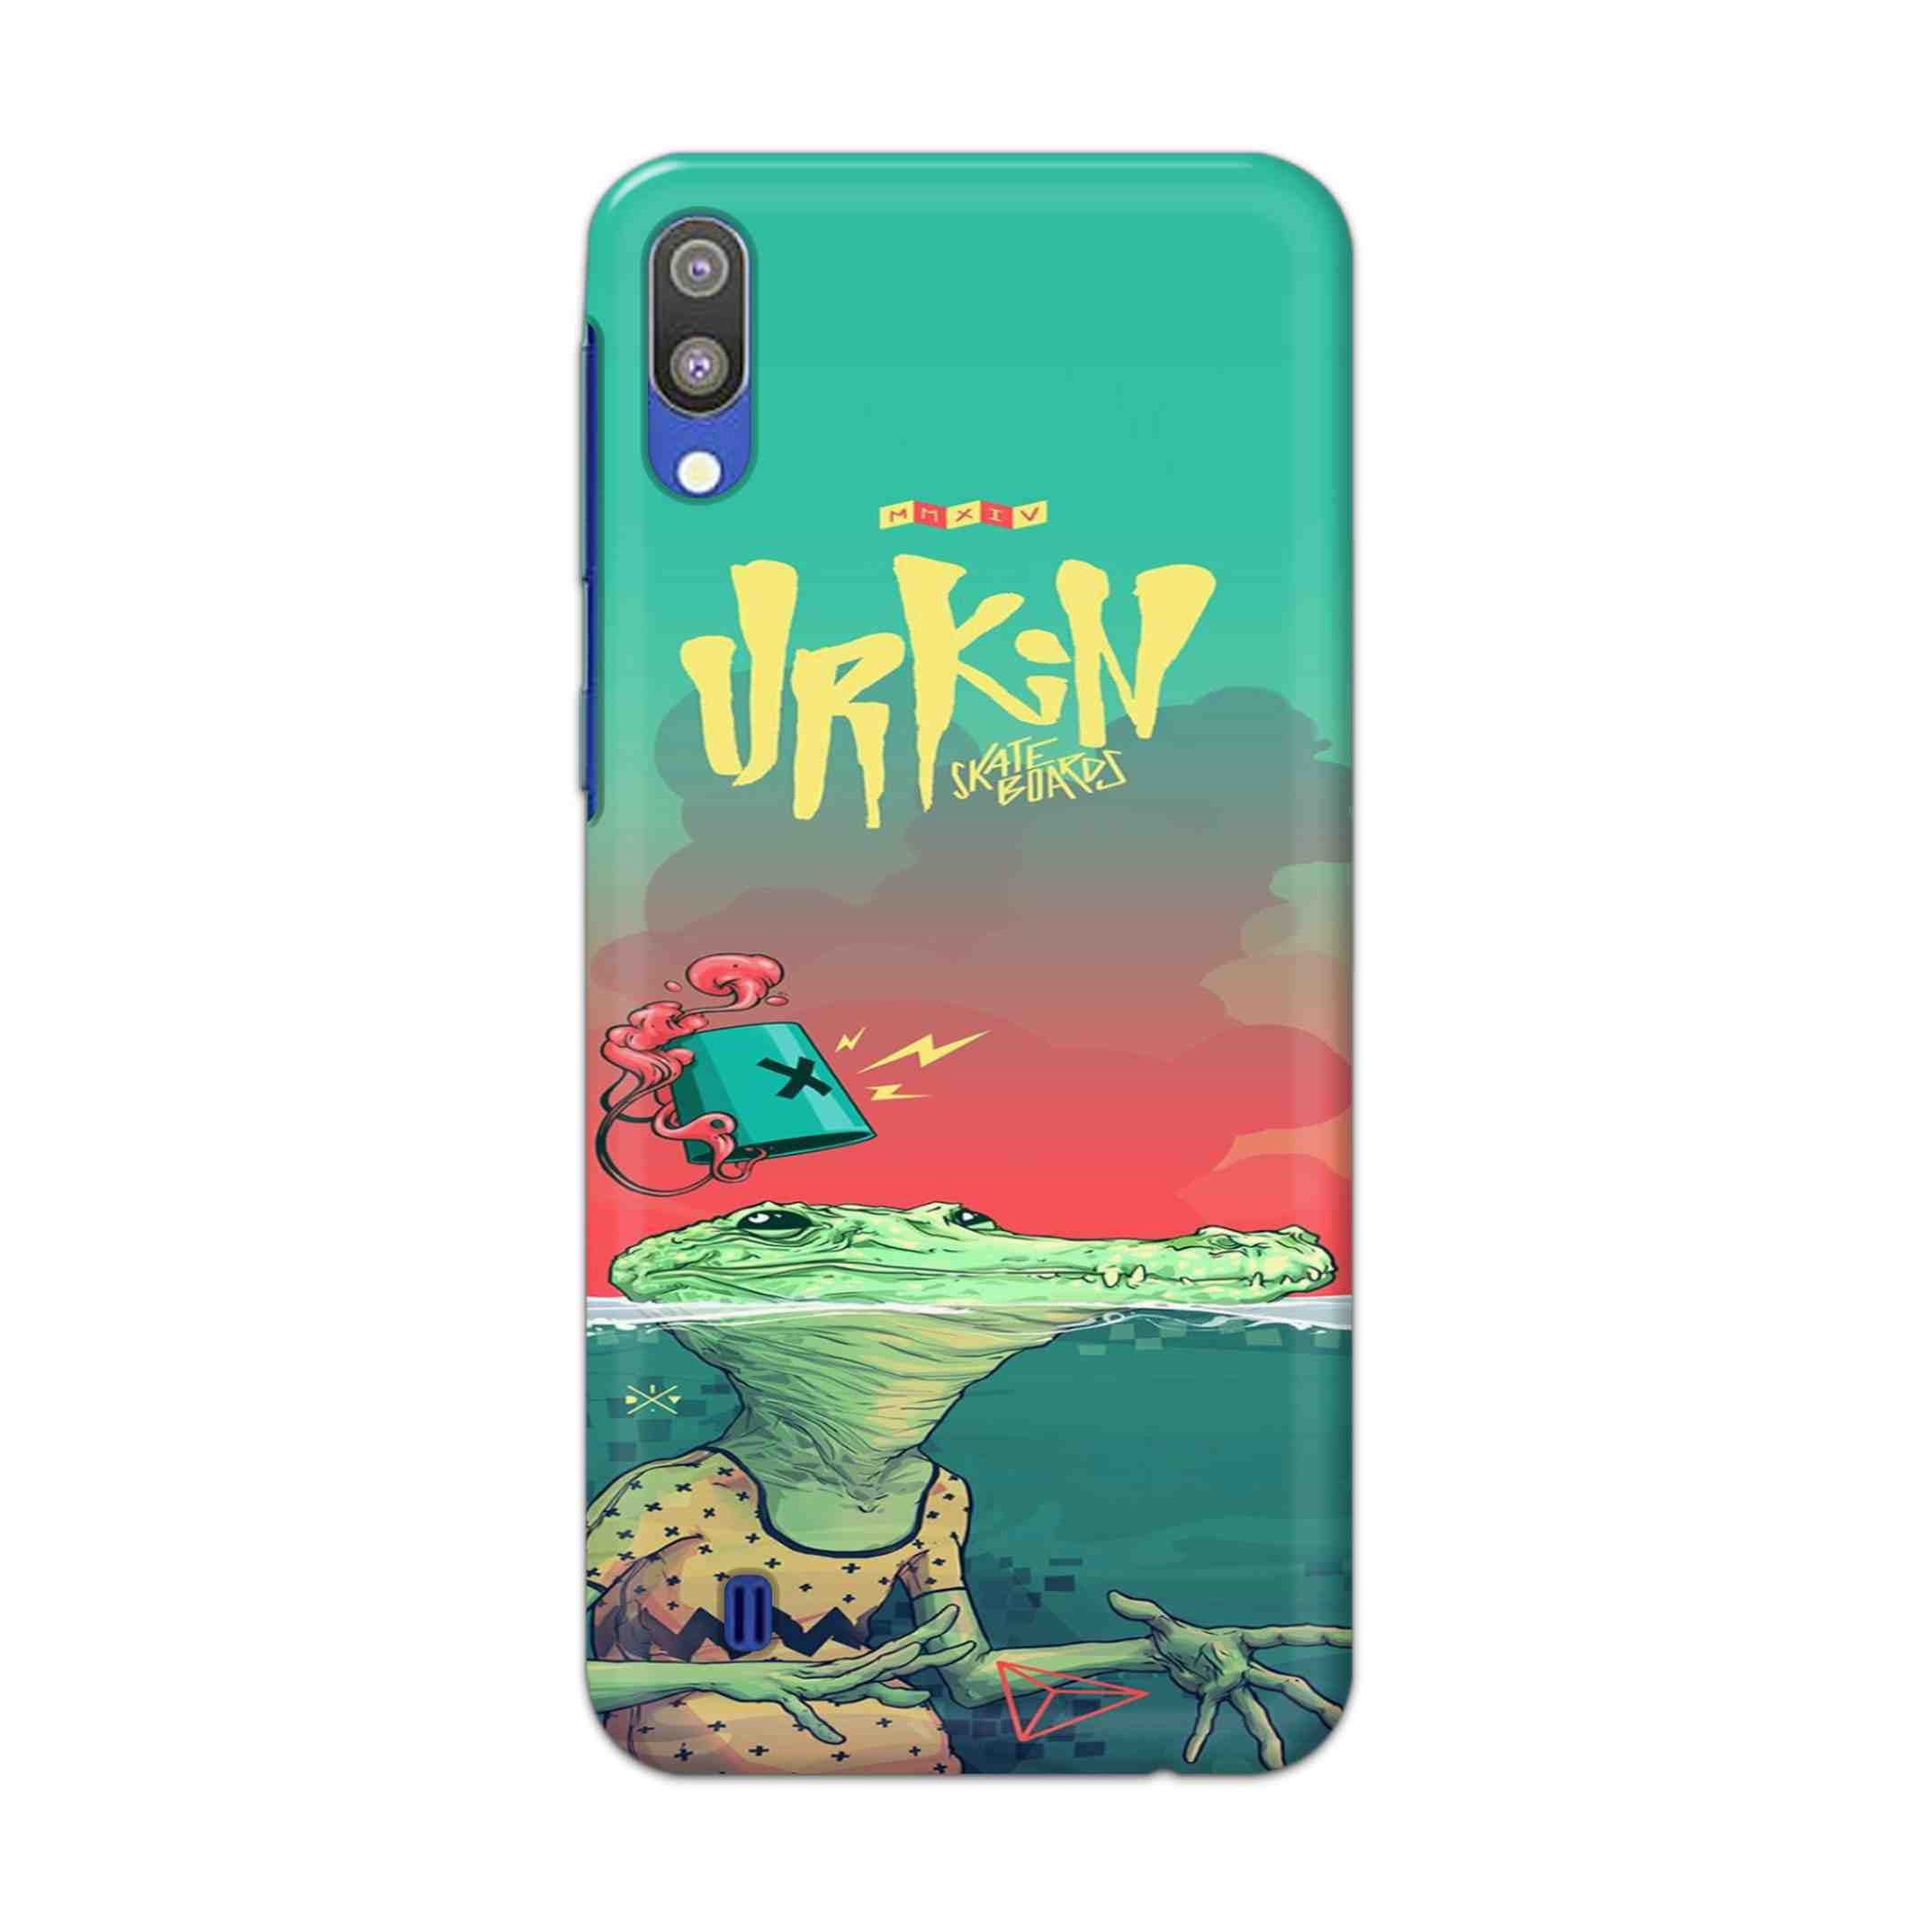 Buy Urkin Hard Back Mobile Phone Case Cover For Samsung Galaxy M10 Online